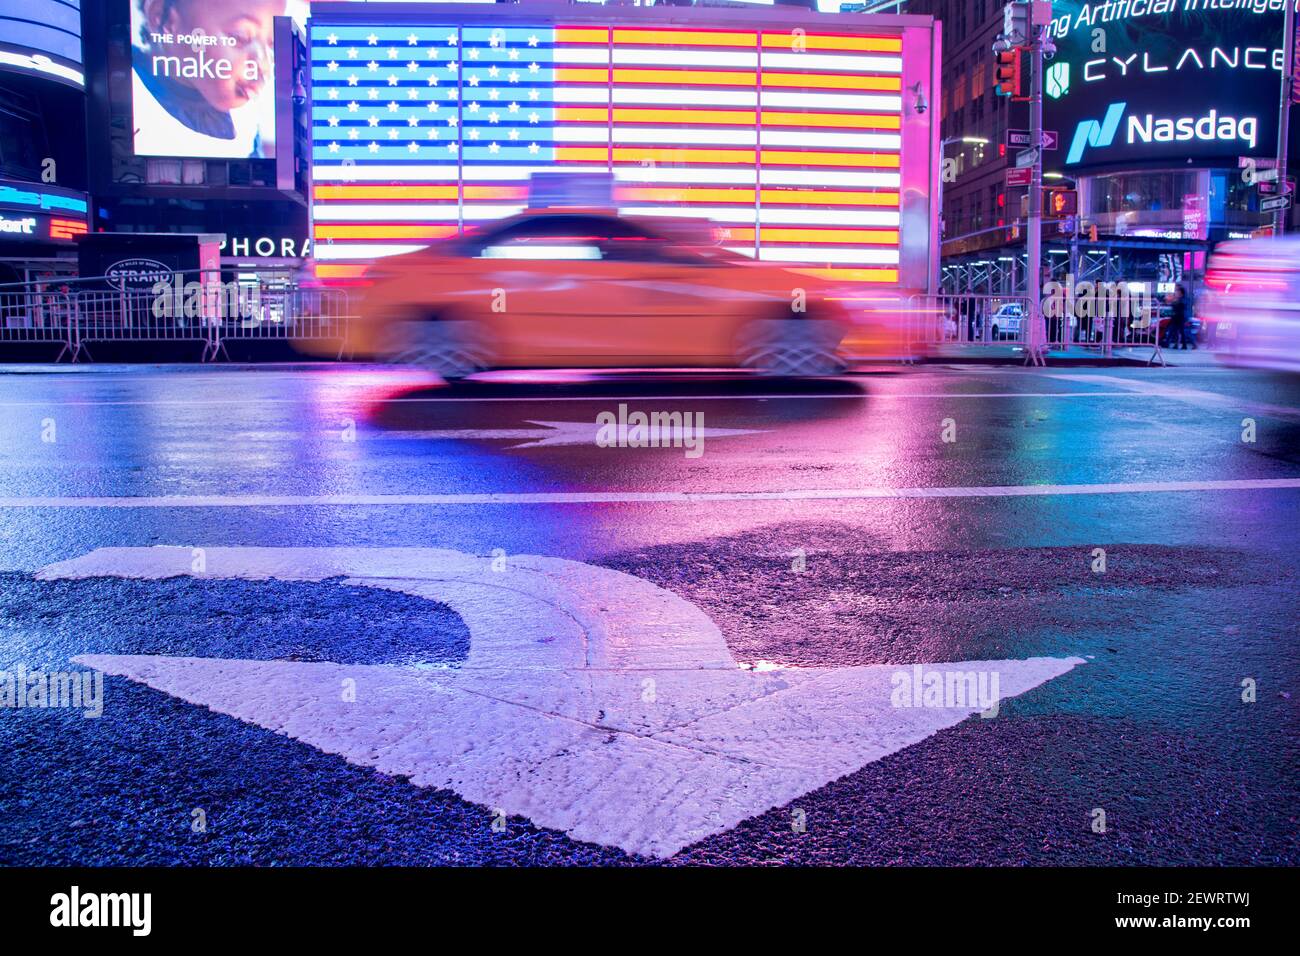 Taxi blurring by an illuminated flag of the United States of America at Times Square, New York City, United States of America, North America Stock Photo